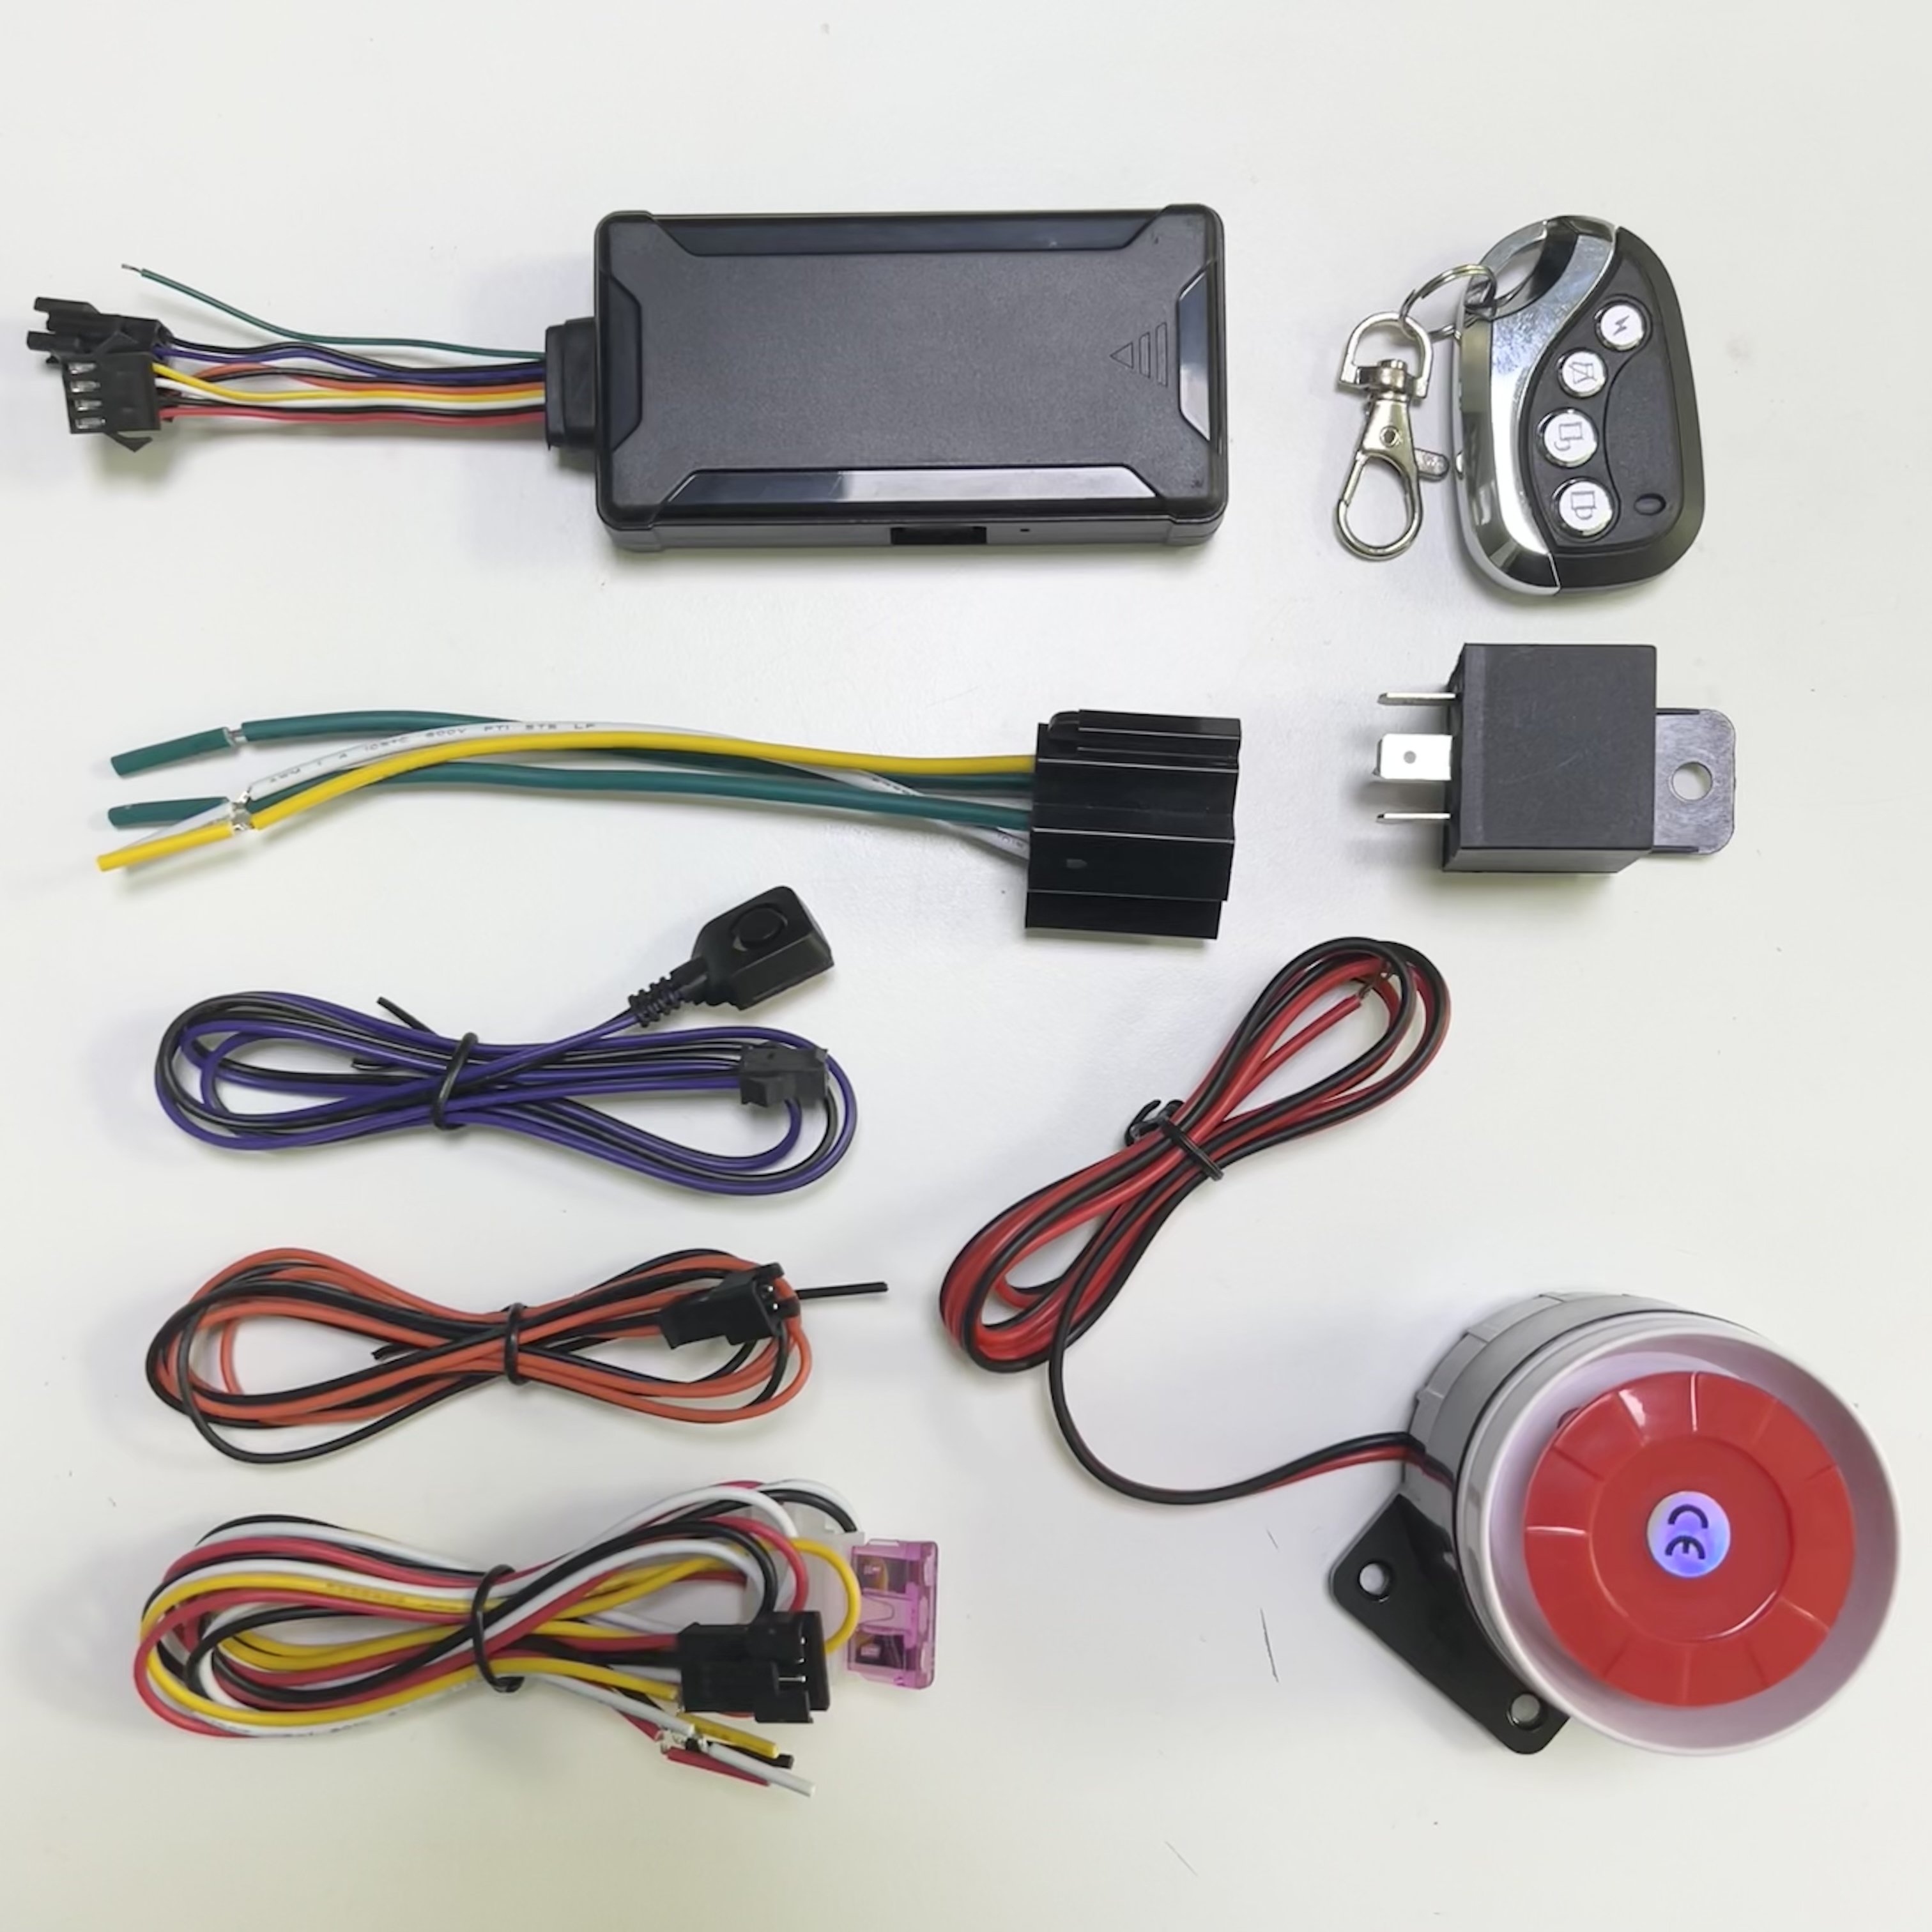 4G GPS Tracker for vehicles price